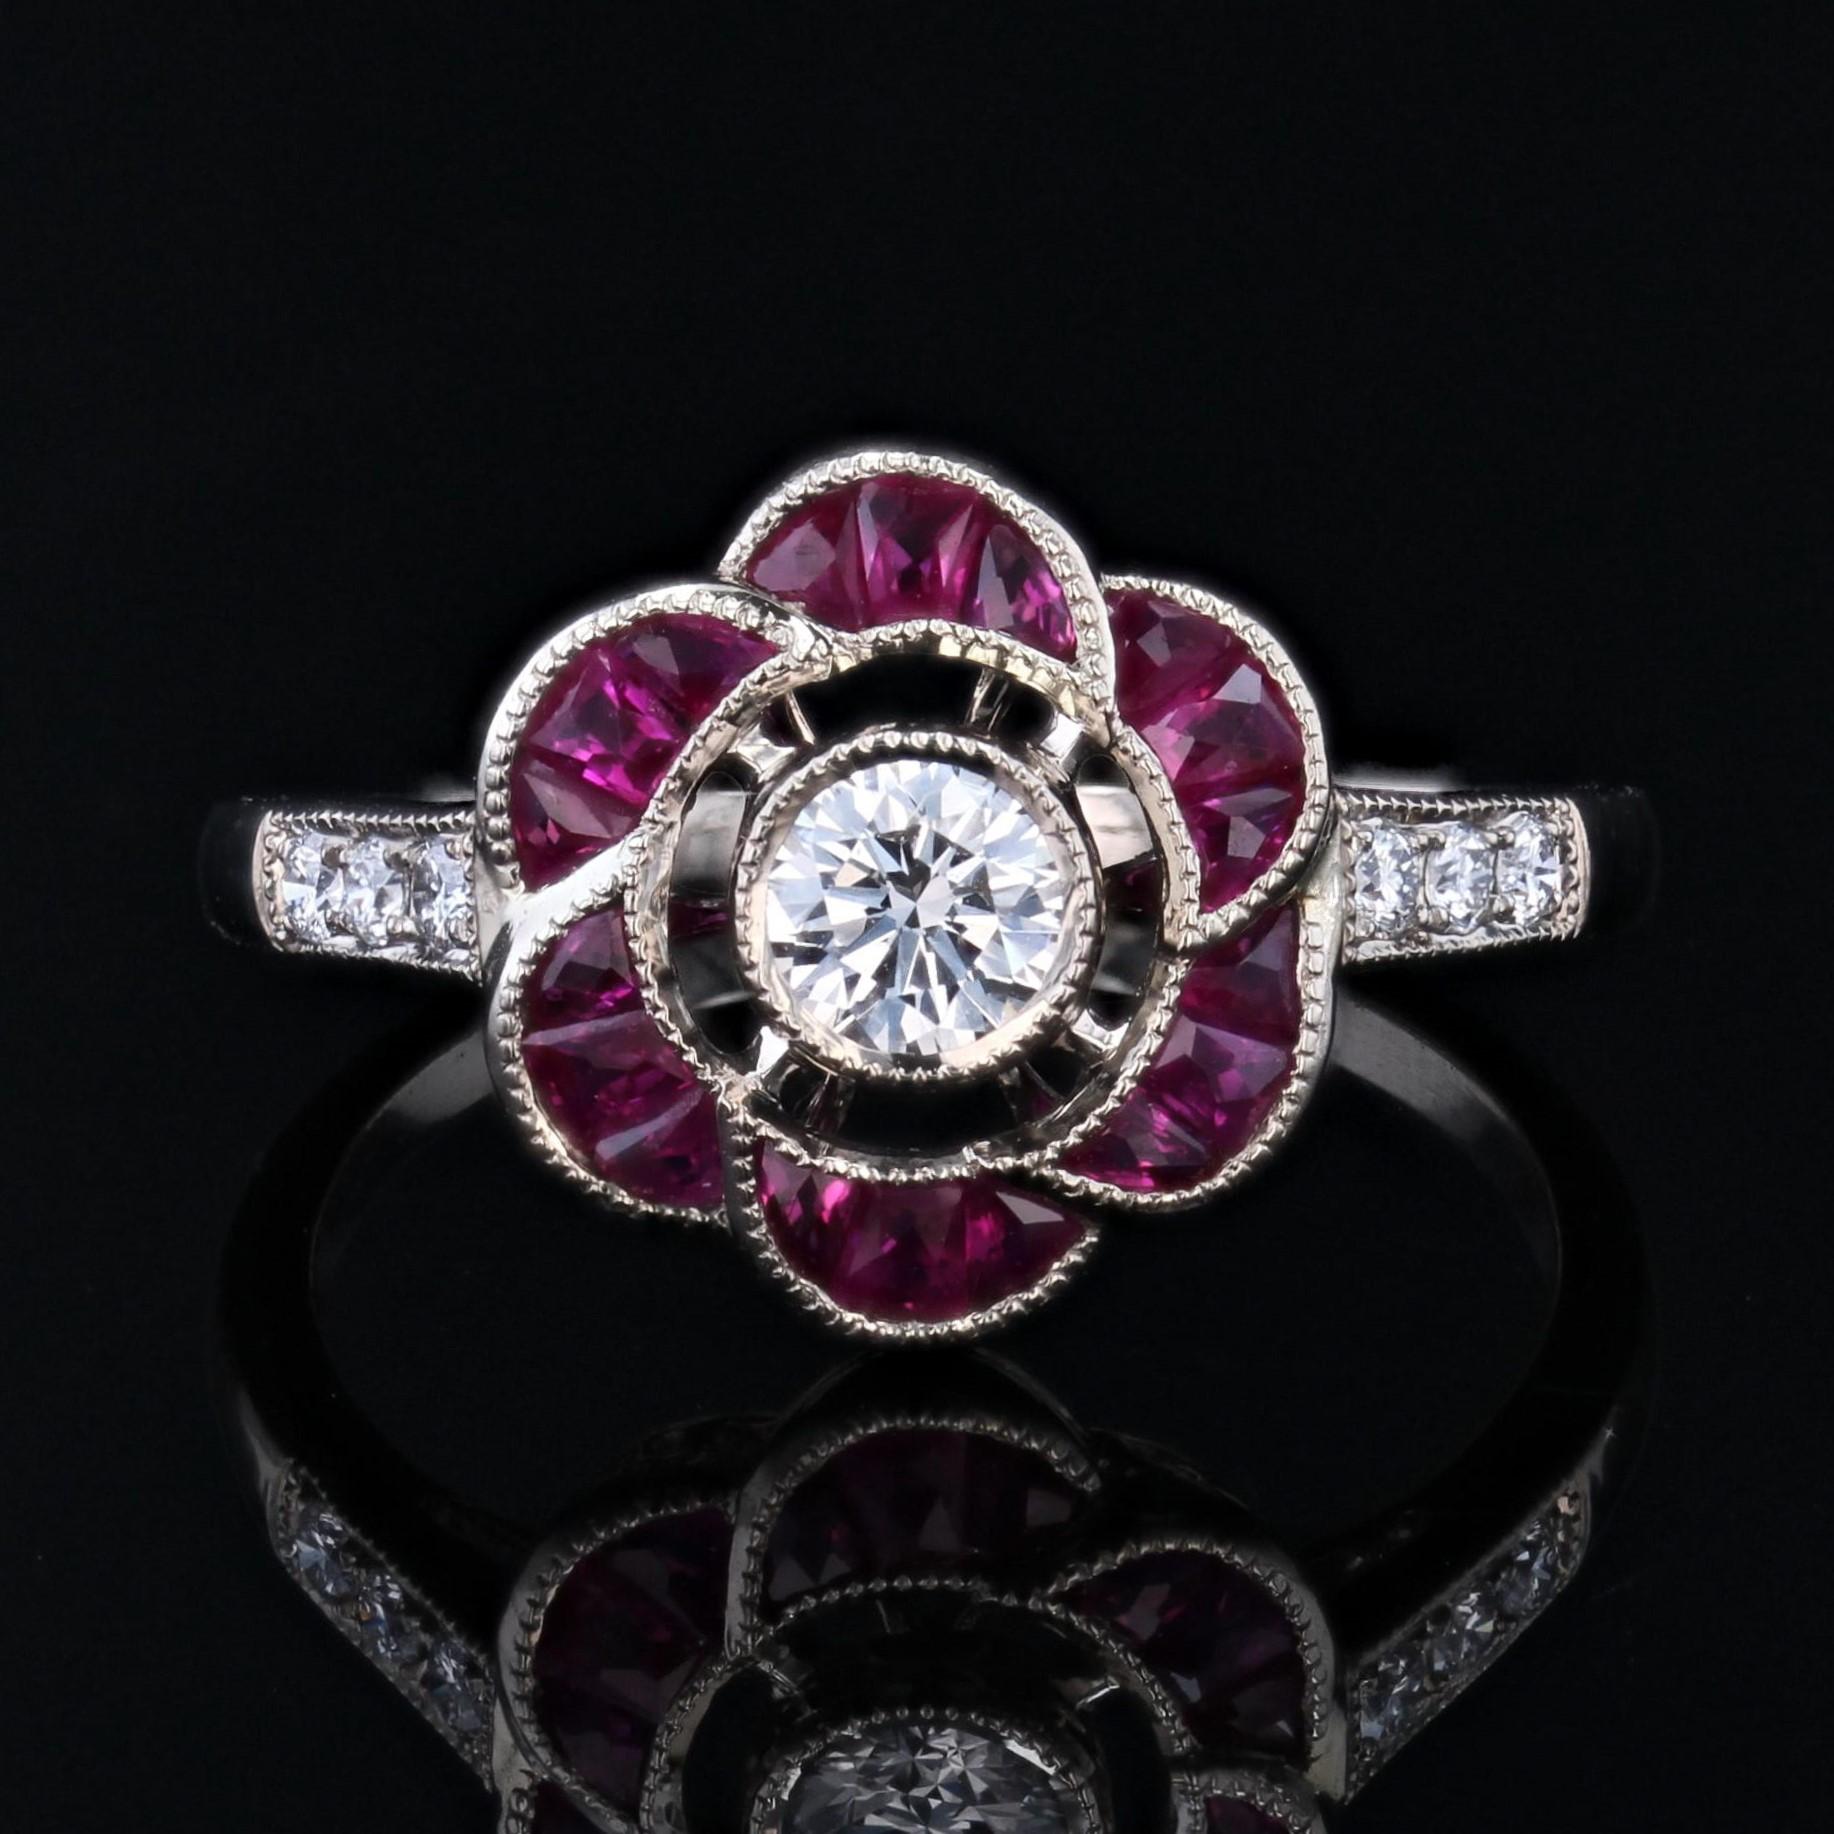 Women's New Art Deco Style Calibrated Rubies Diamonds 18 Karat White Gold Flower Ring For Sale